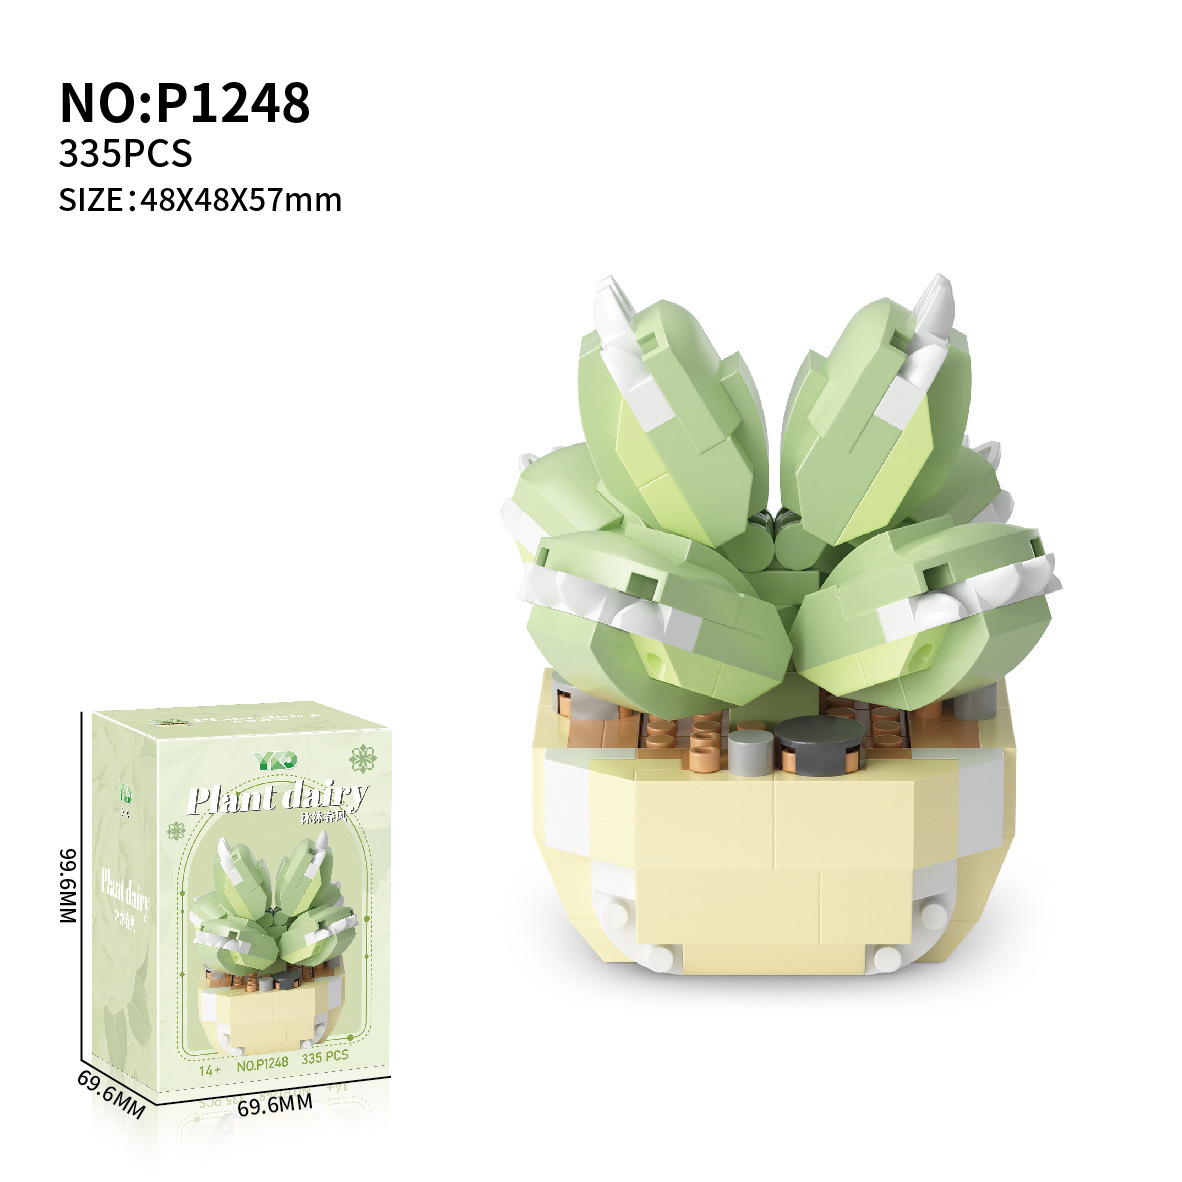 [Wholesale Delivery] Artificial Flower Series Succulent Garden Assembled Building Blocks Decoration Children's Gifts Compatible with Lego